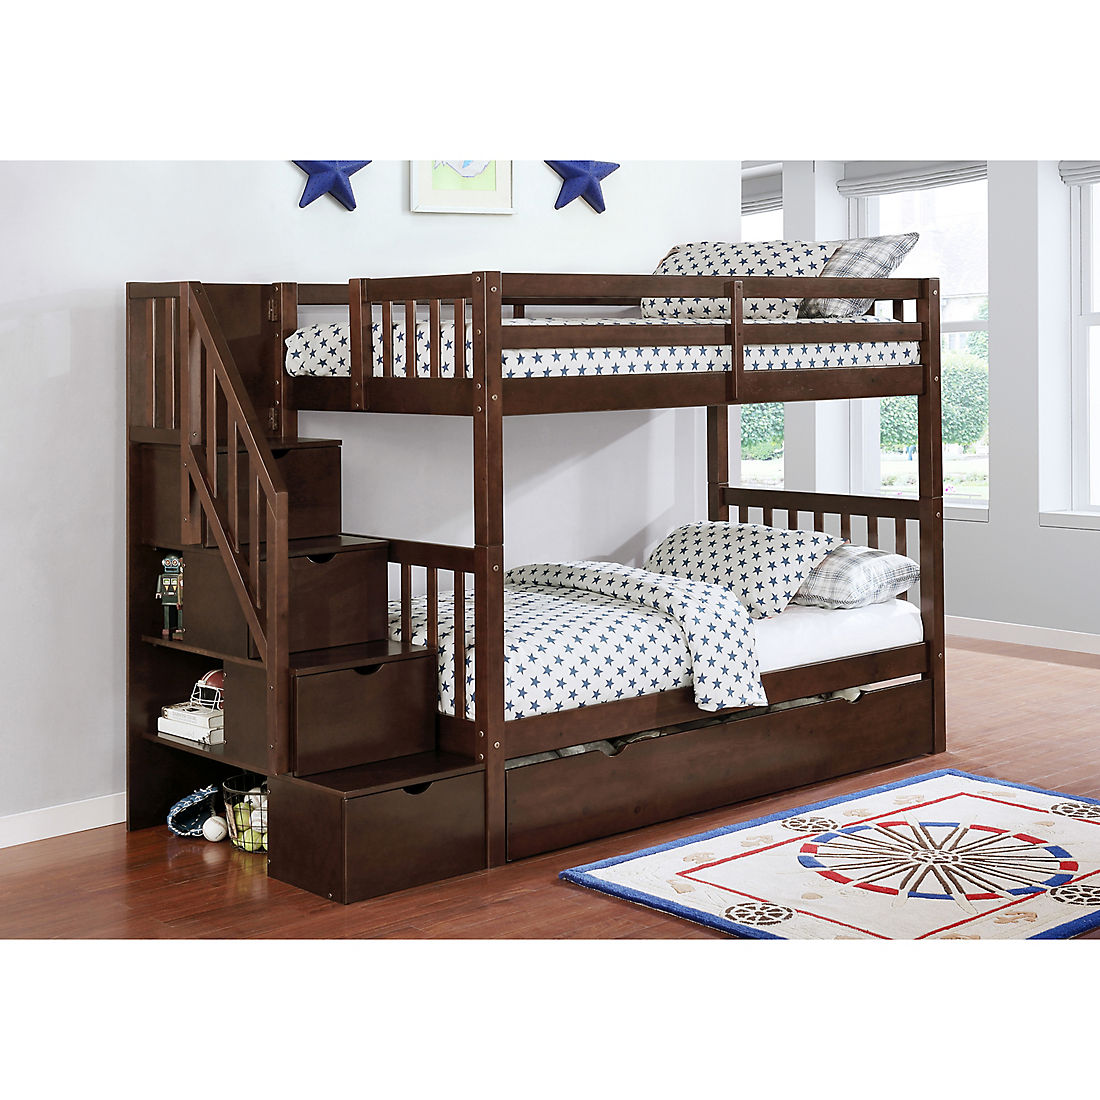 Berkley Jensen Twin Over Stairway, A Bunk Bed With Stairs